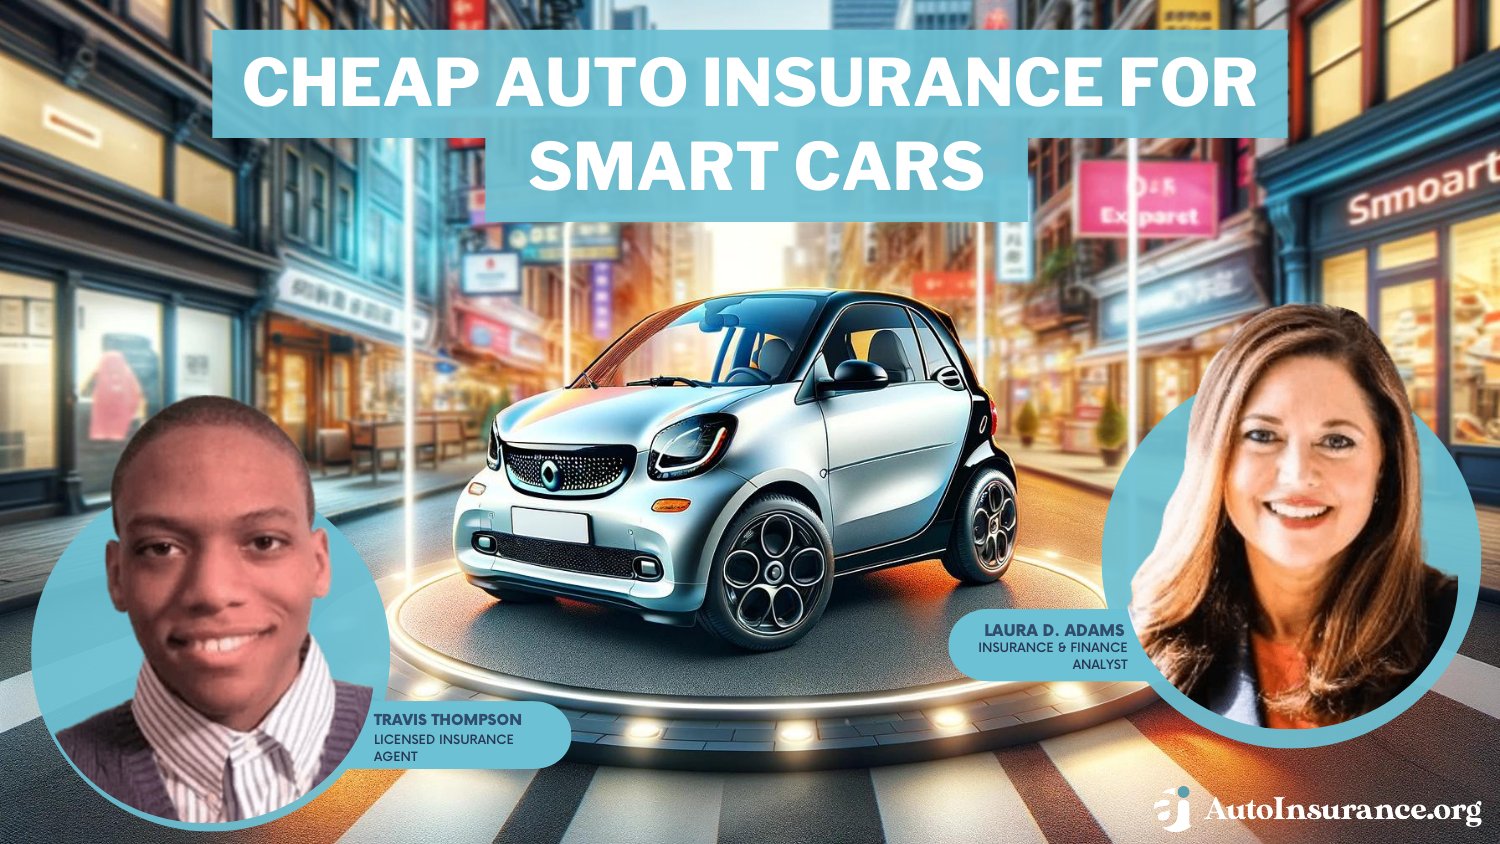 Cheap auto insurance for smart cars